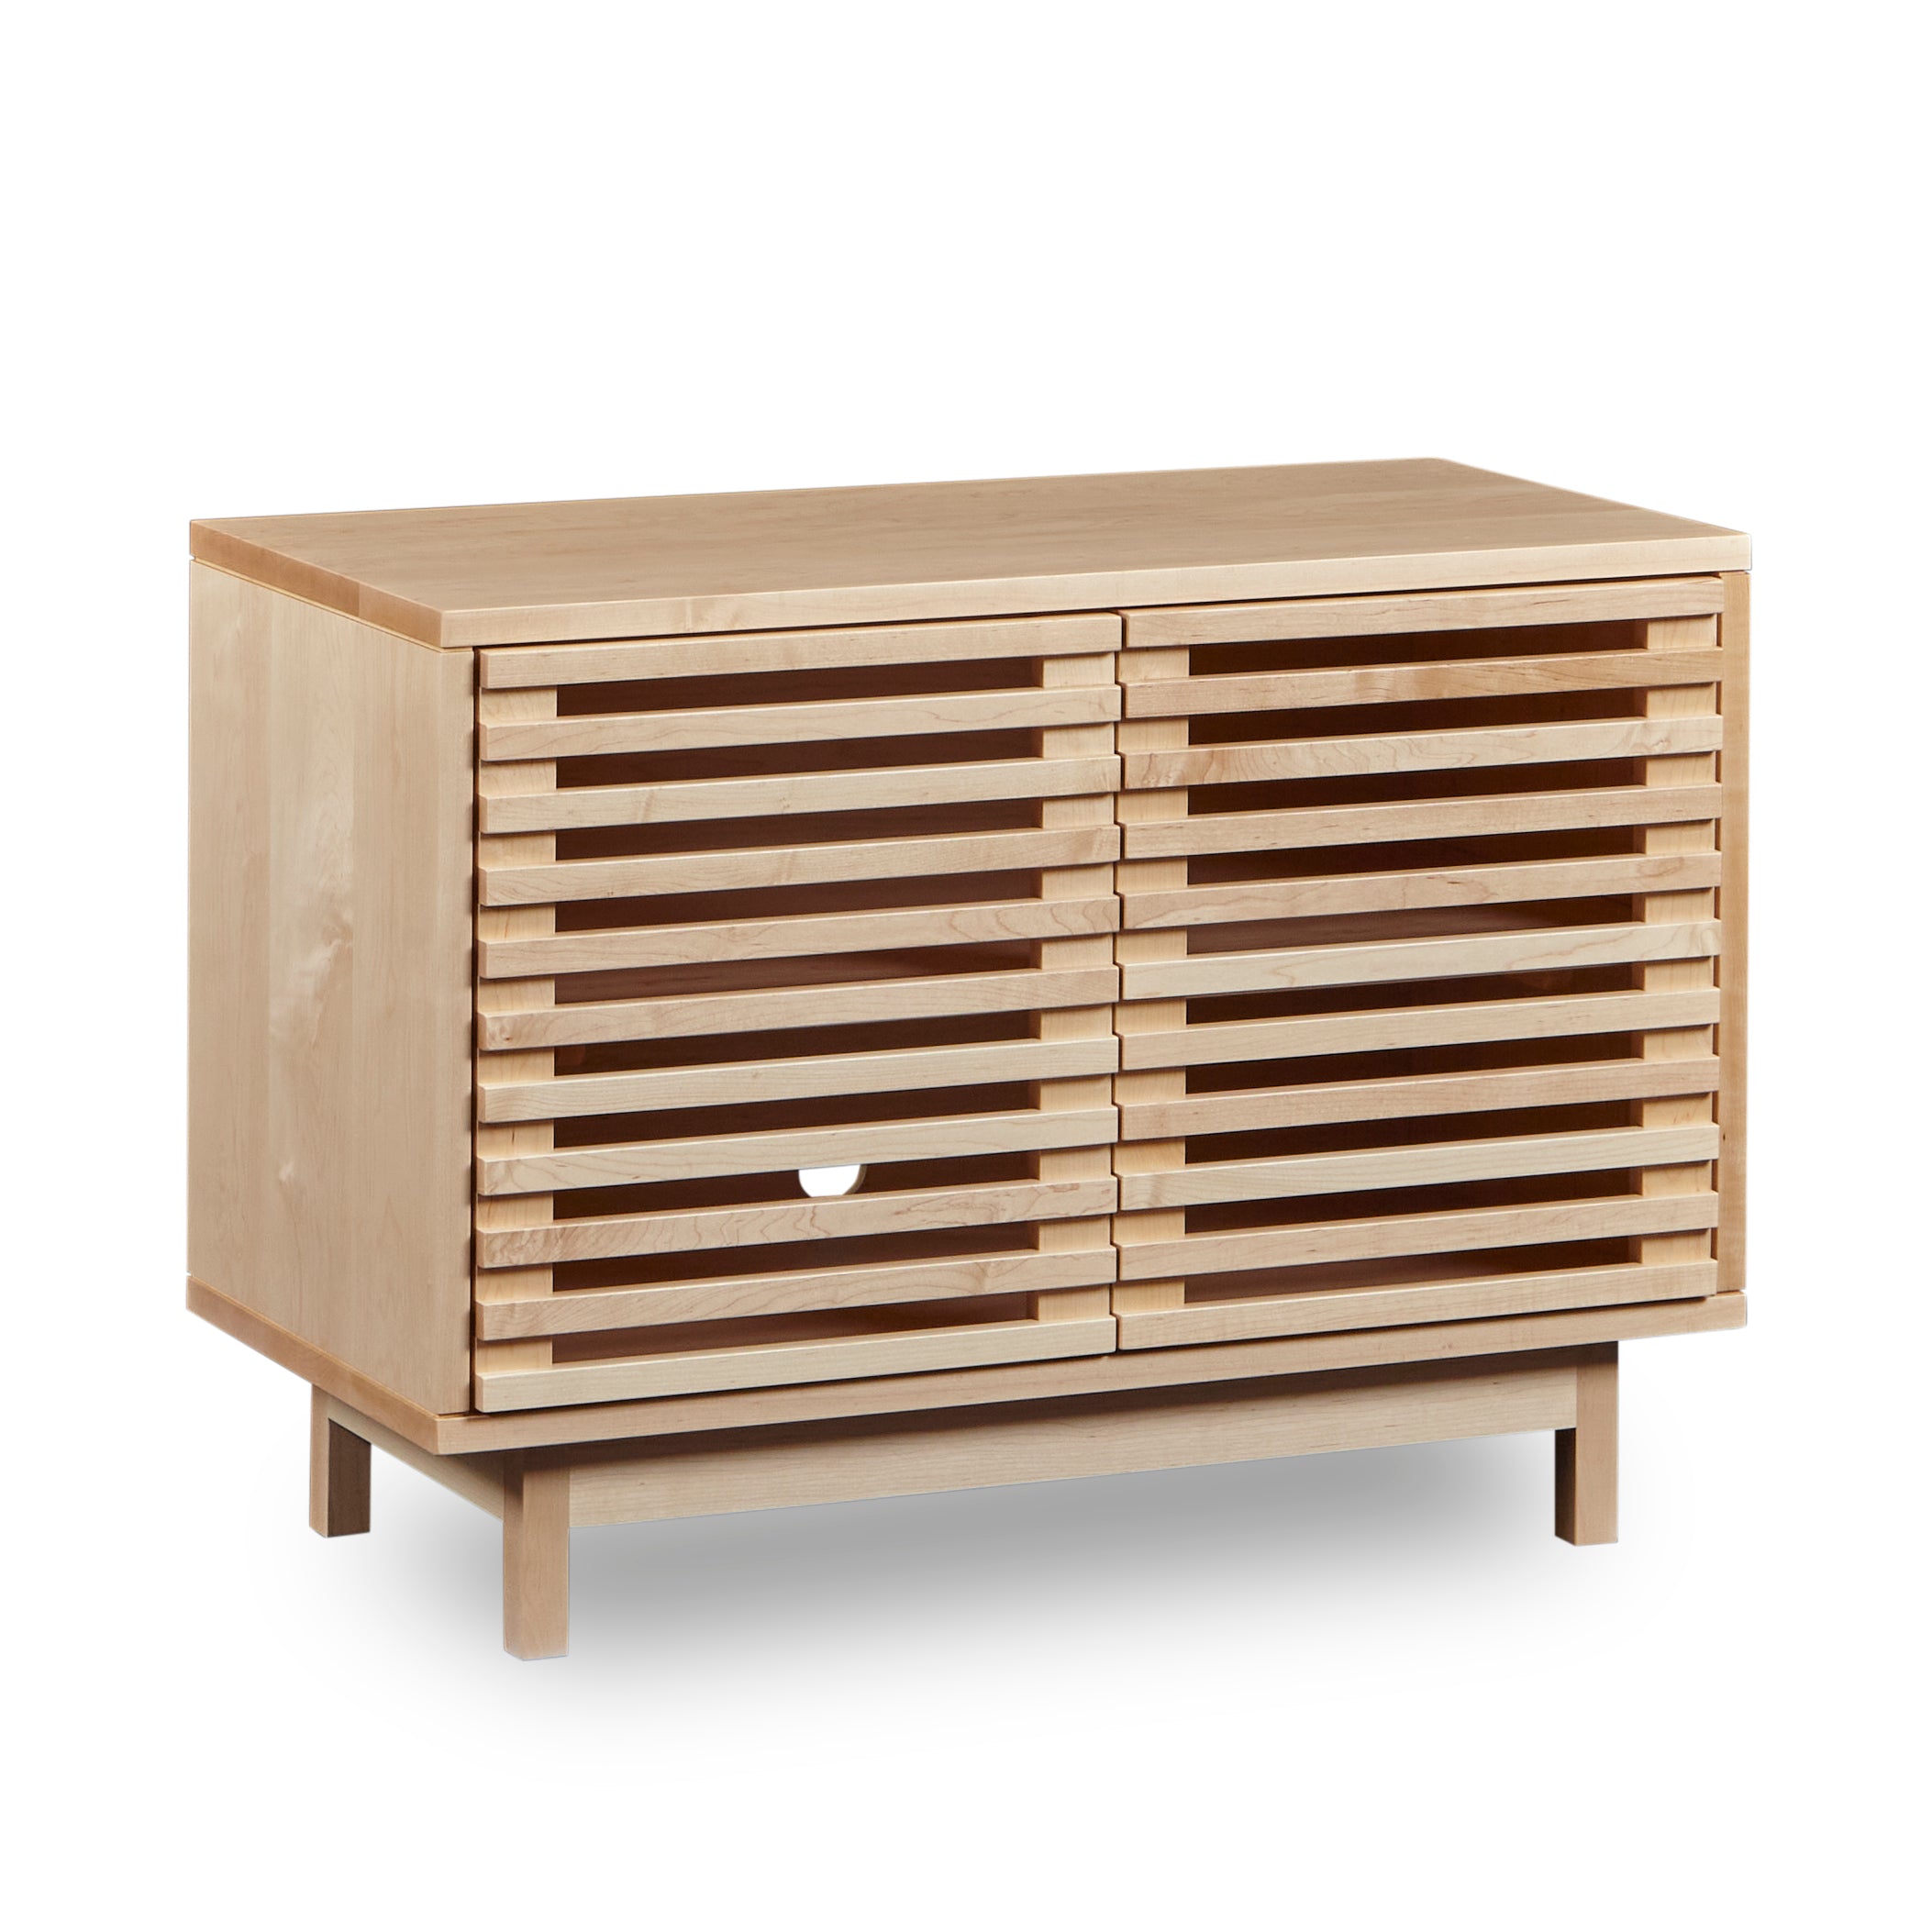 Modern slatted media stand from Chilton Furniture in small size and maple wood